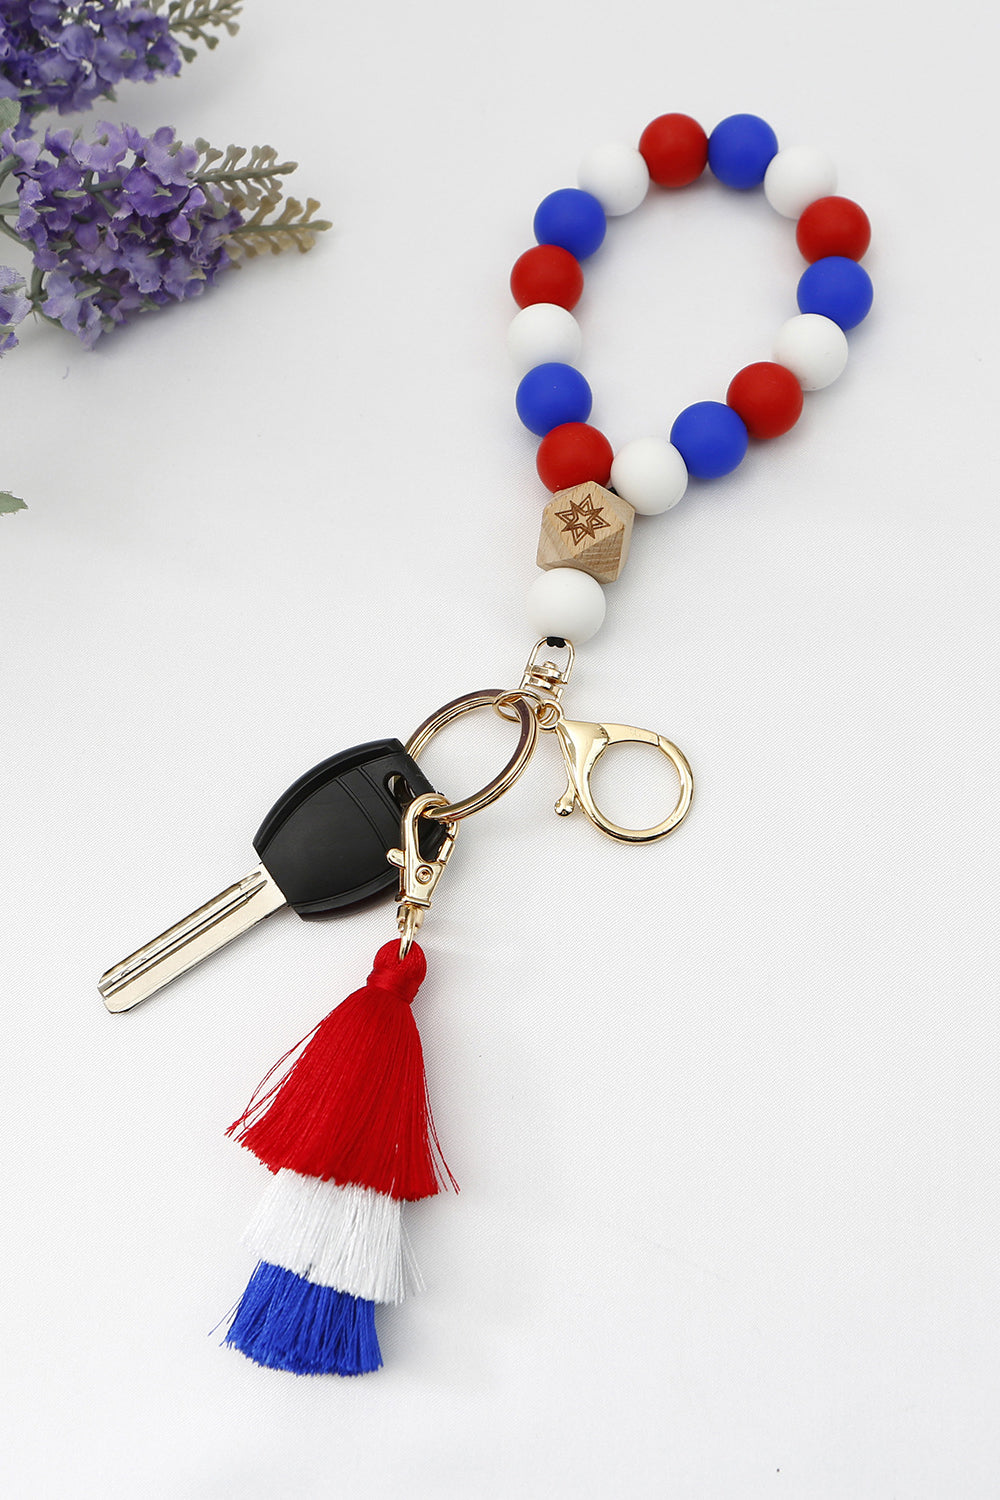 Silica Gel Bead Wristlet Keychain with Layered Tassels Red / One Size